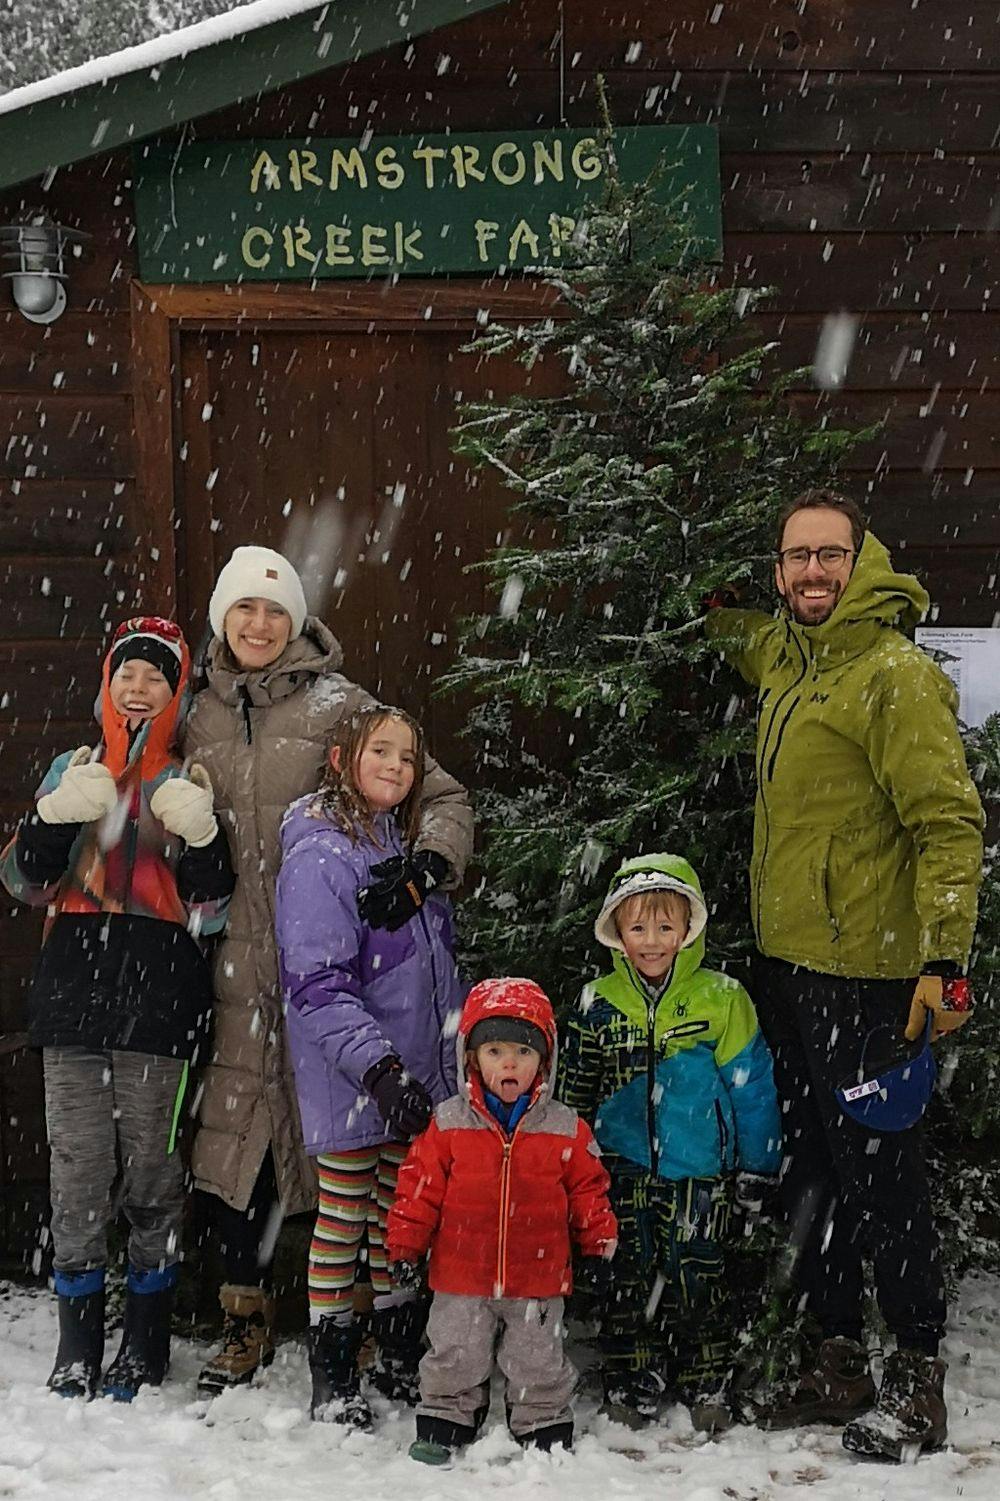 NJ, her husband, and her four children smiling in the snow in front of an evergreen tree